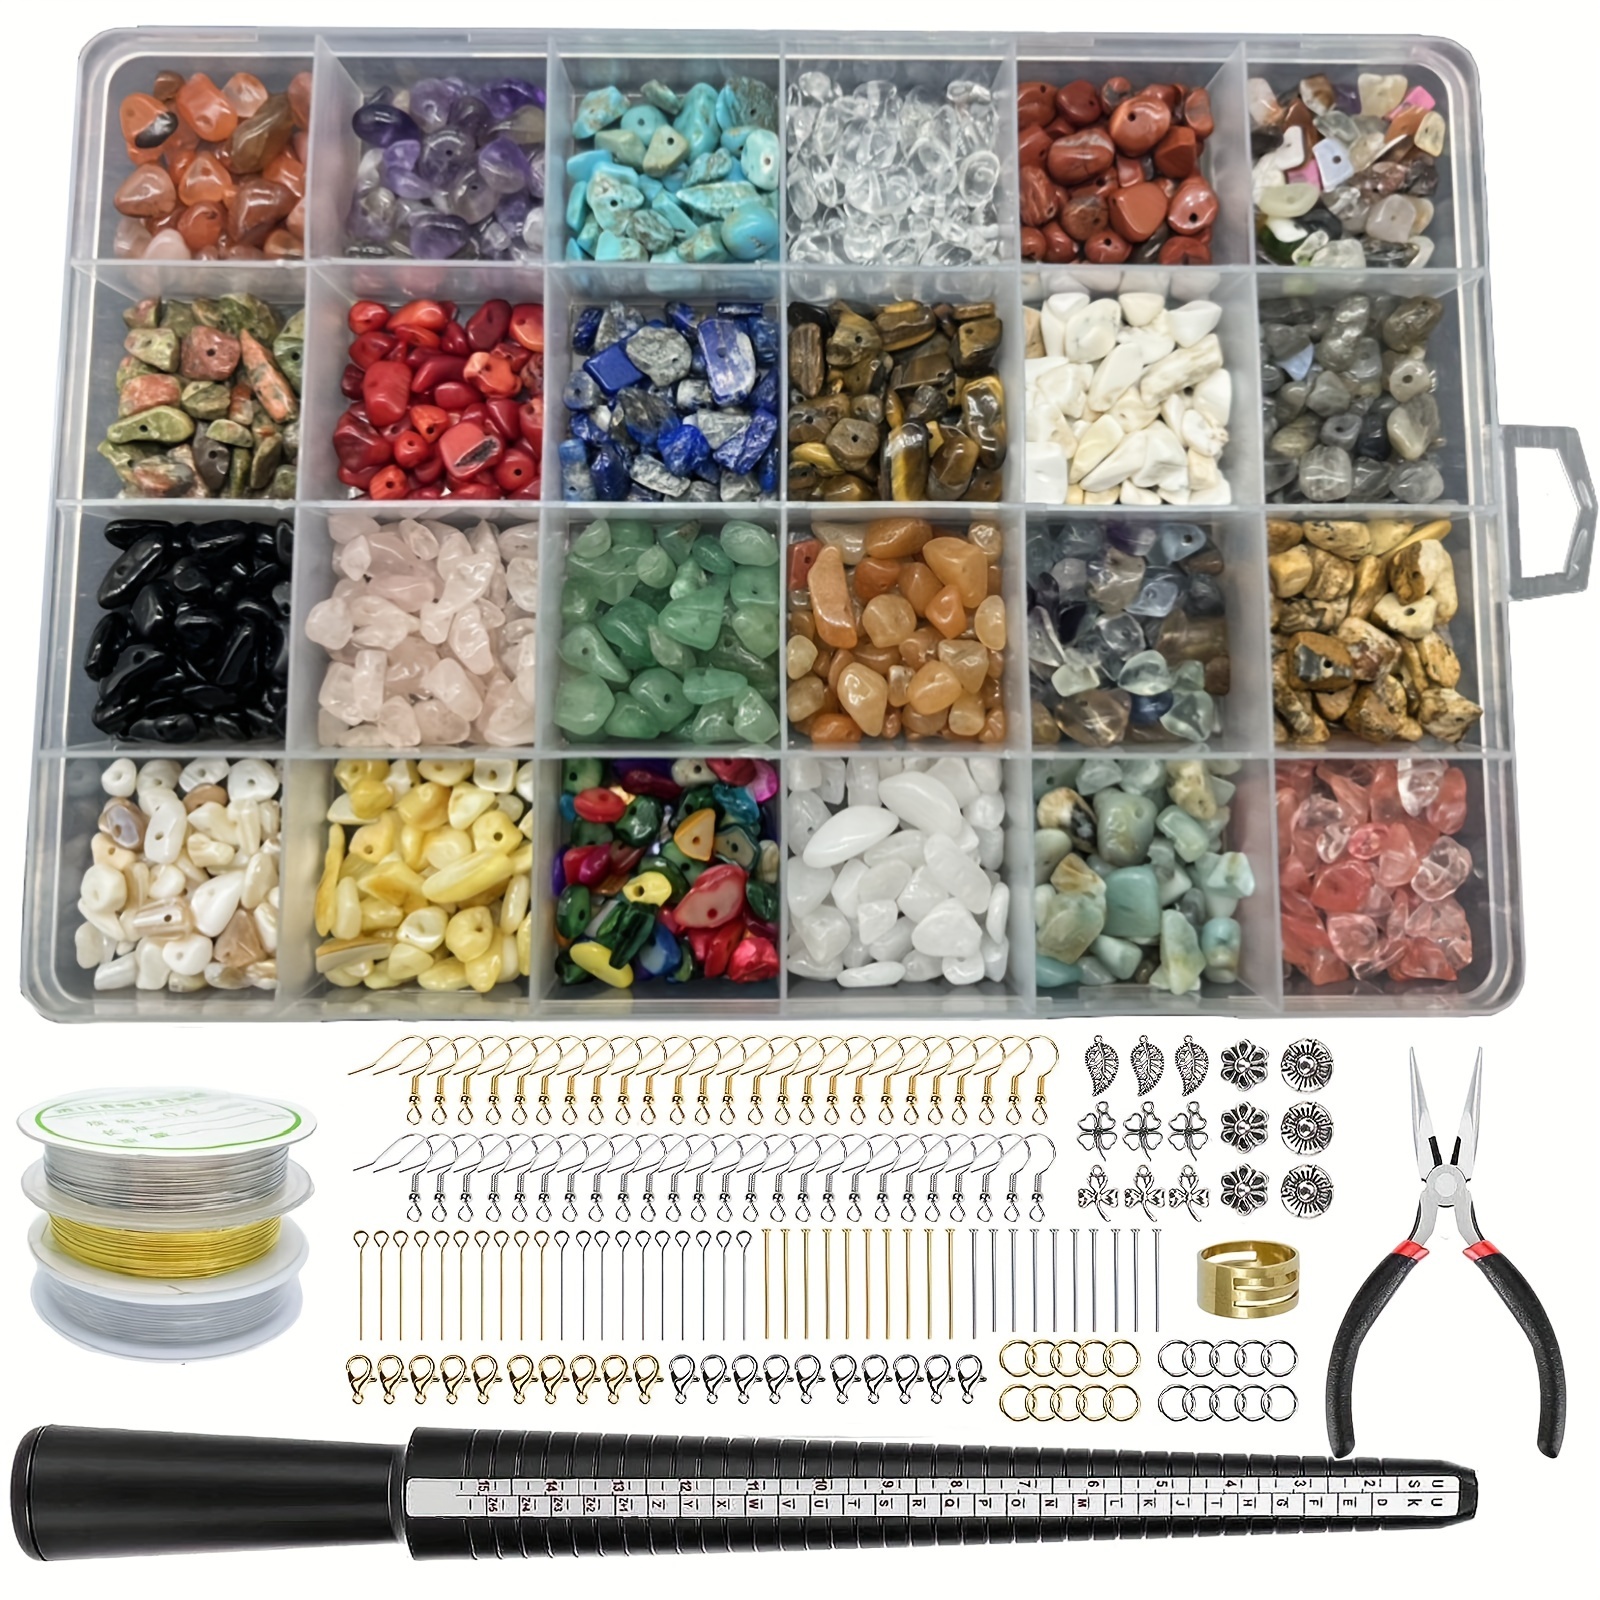 Full DIY Kit Wire Wrapping Kit Crystals Jewelry Making Kits 